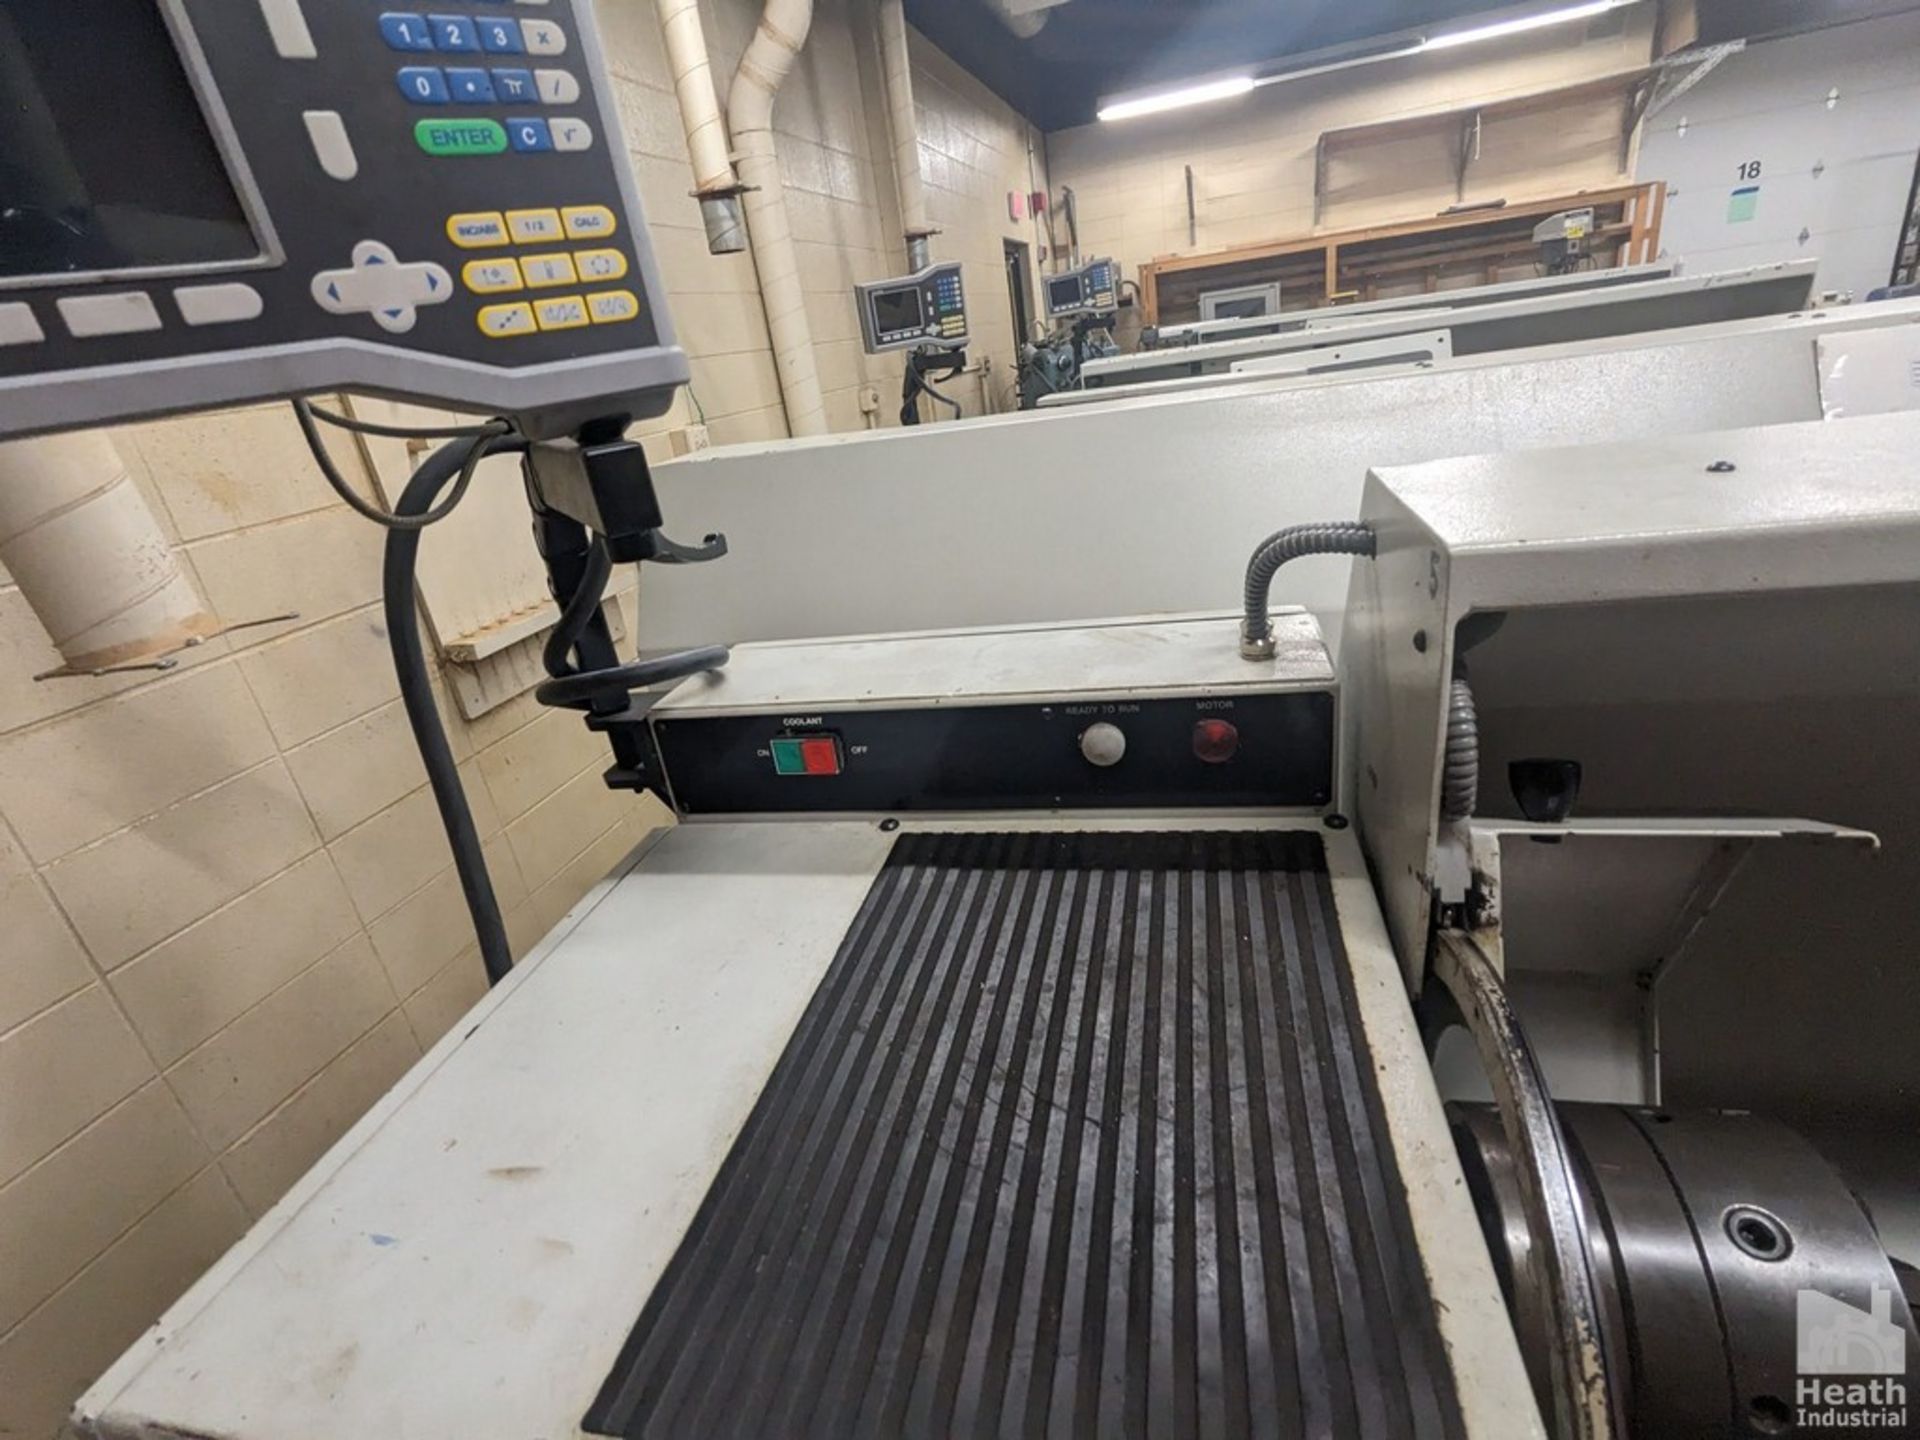 CLAUSING-METOSA 13"X40" MODEL 1340S TOOLROOM LATHE, S/N 50002, 2500 SPINDLE RPM, WITH 6" 3-JAW - Image 3 of 7